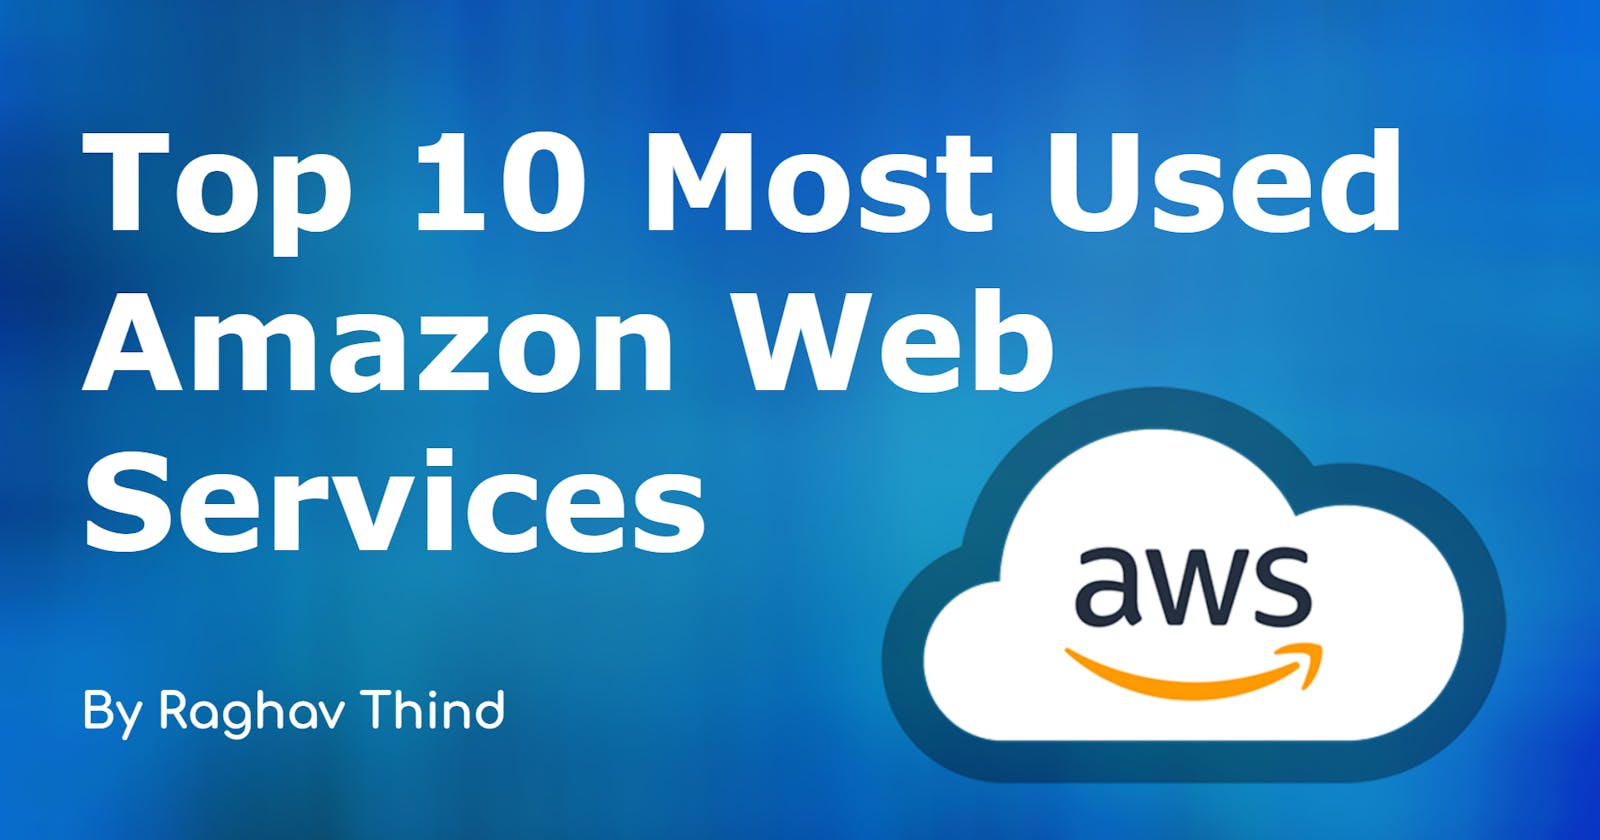 Top 10 Most Used Amazon Web Services